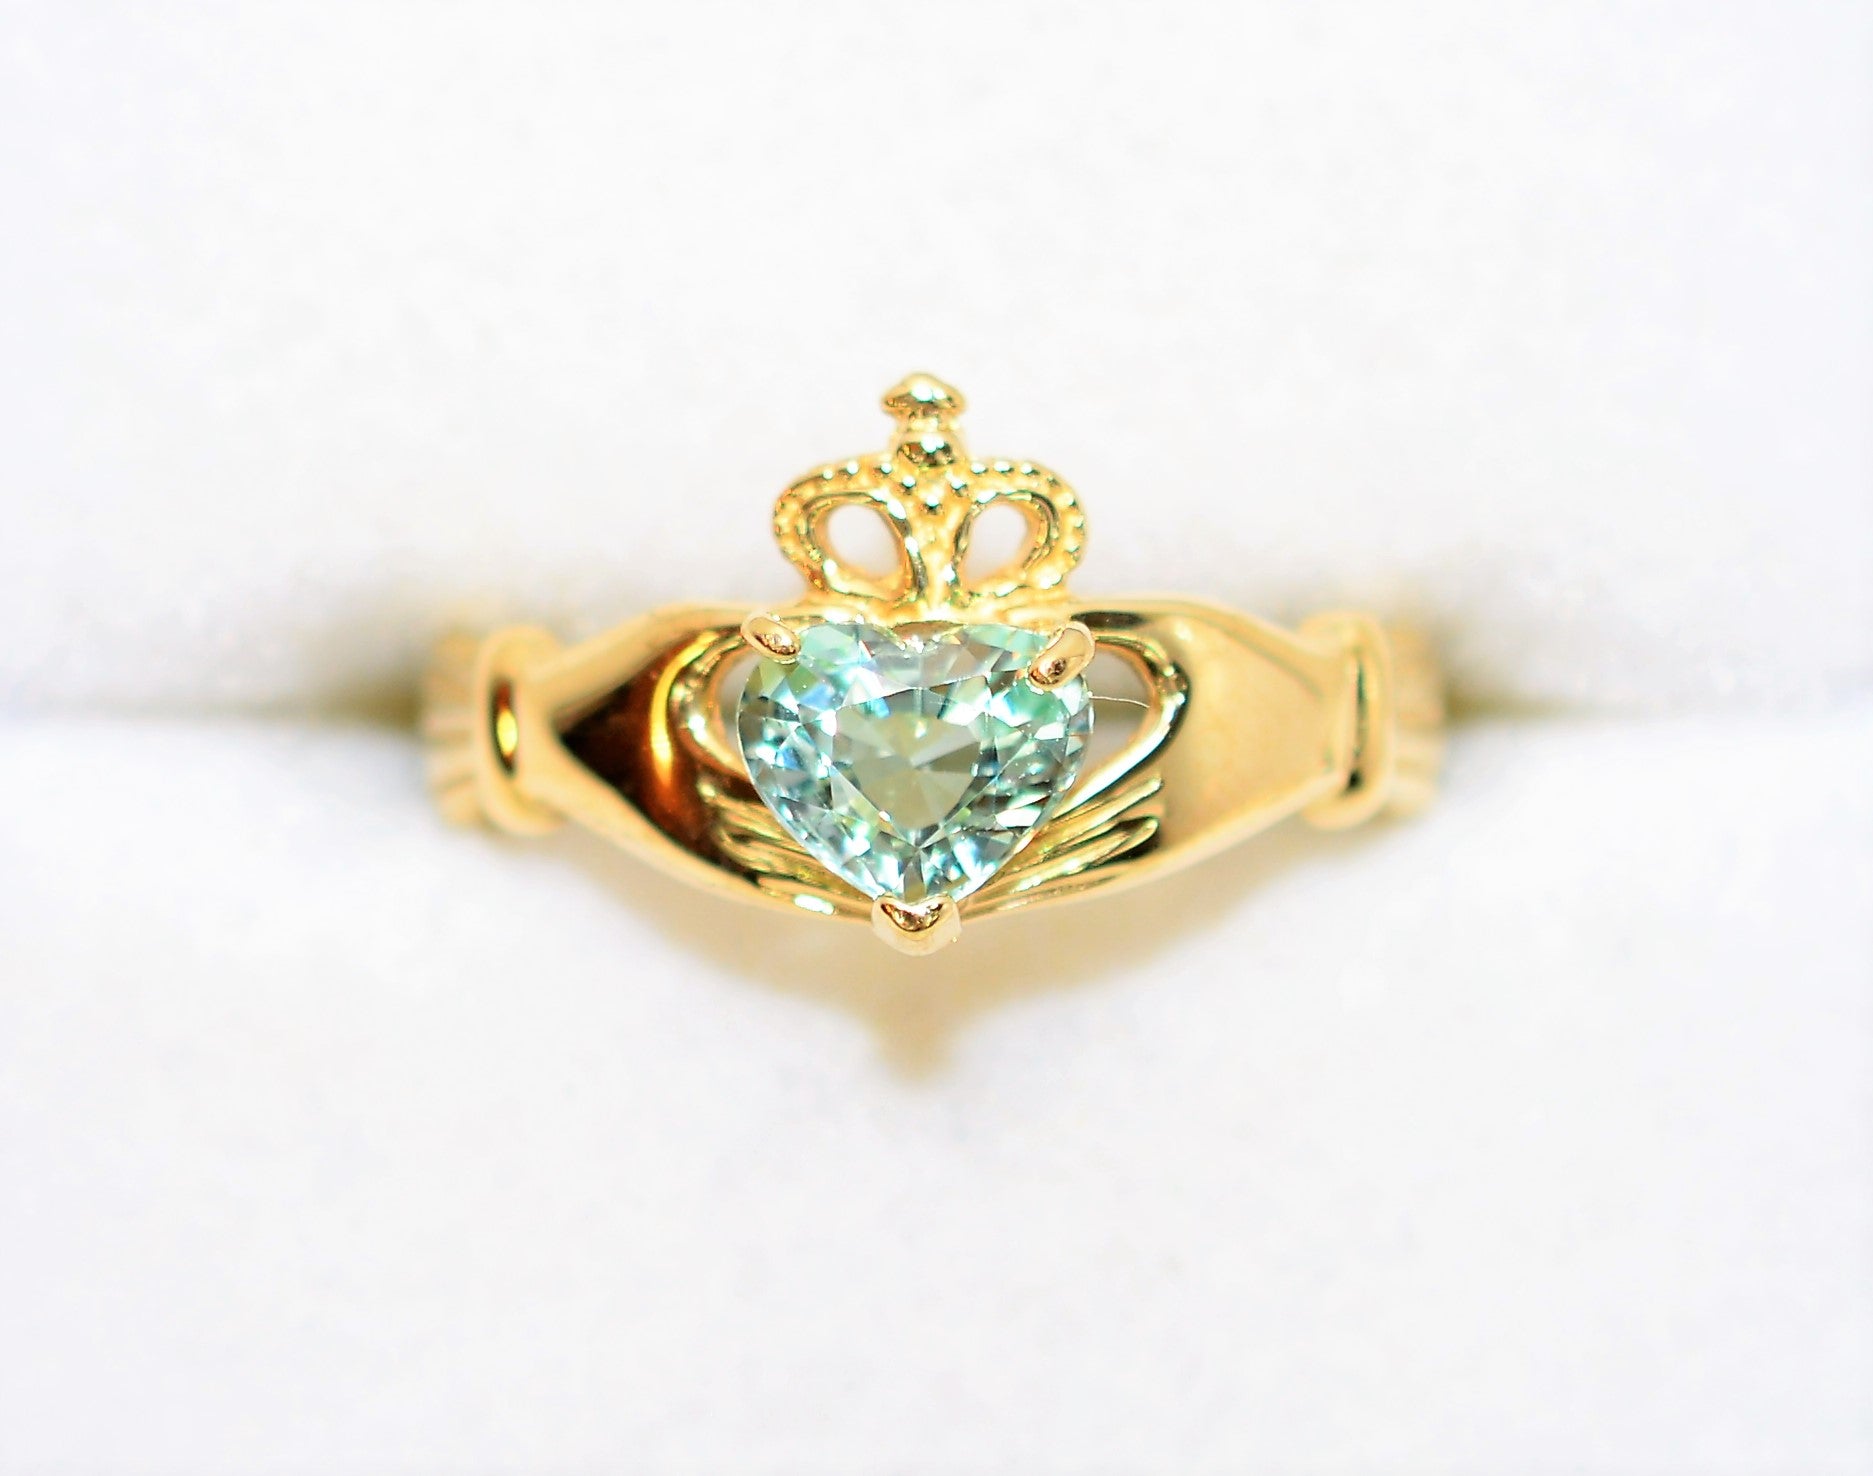 Certified Natural Paraiba Tourmaline Ring 14K Solid Gold Irish Claddagh .72ct Gemstone Heart Promise Ring Engagement Estate Jewelry